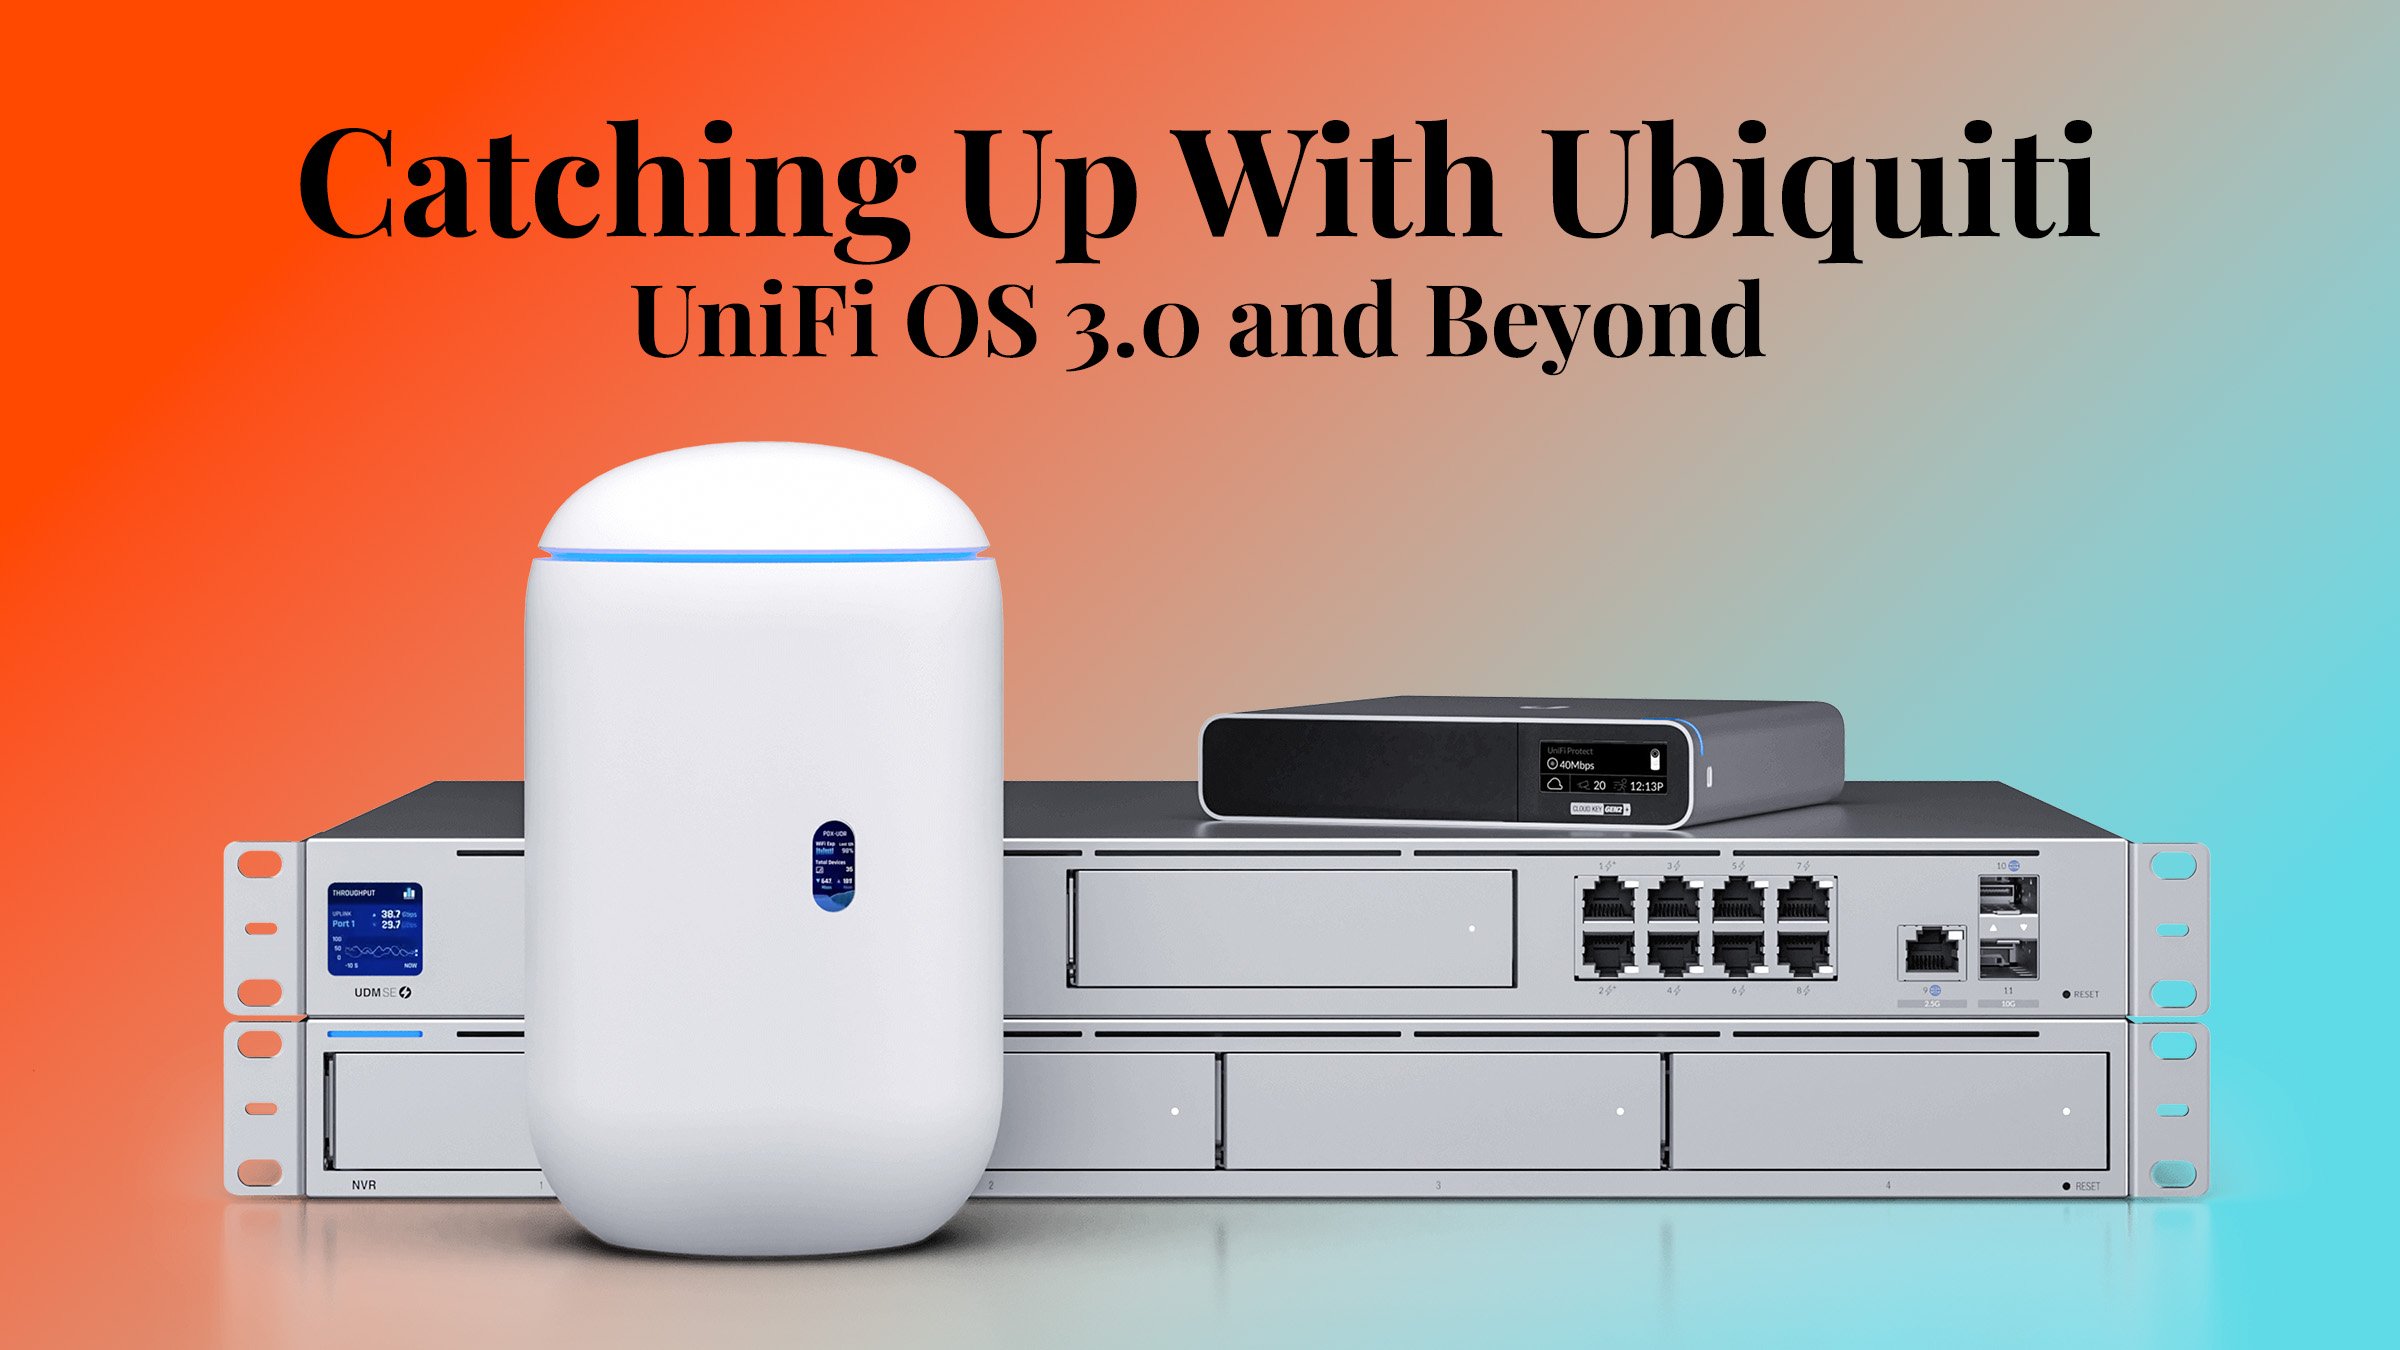 UniFi Smart Lock expands Ubiquiti's smart home rollout - 9to5Toys